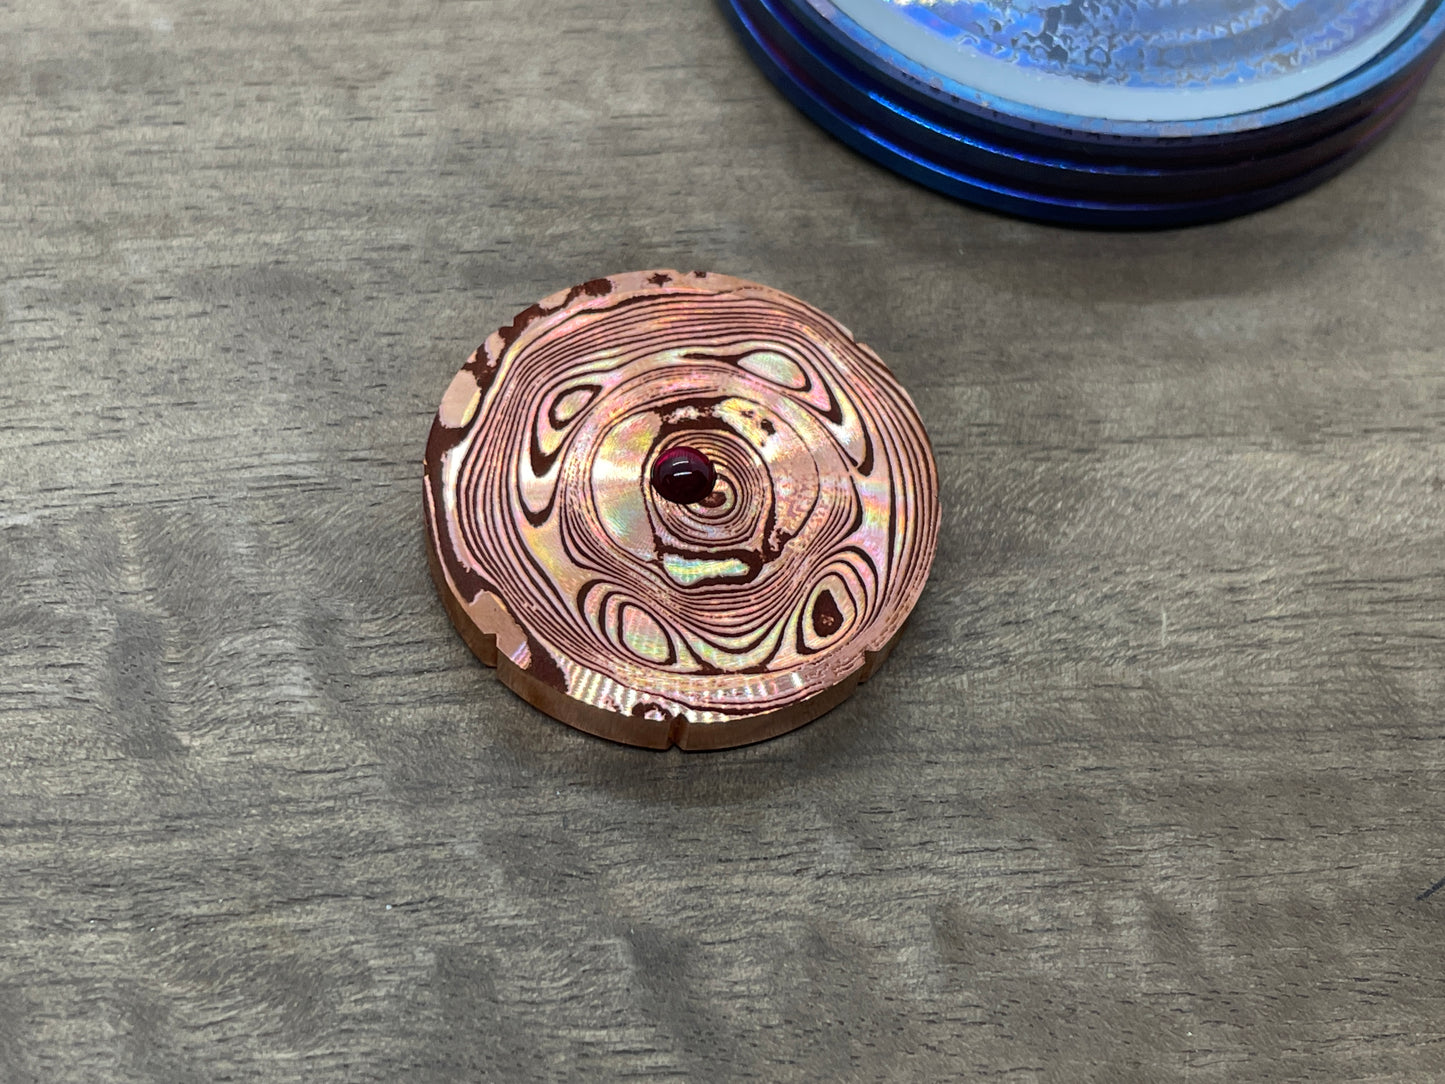 Dama BEAR pattern engraved Copper Spinning Worry Coin Spinning Top